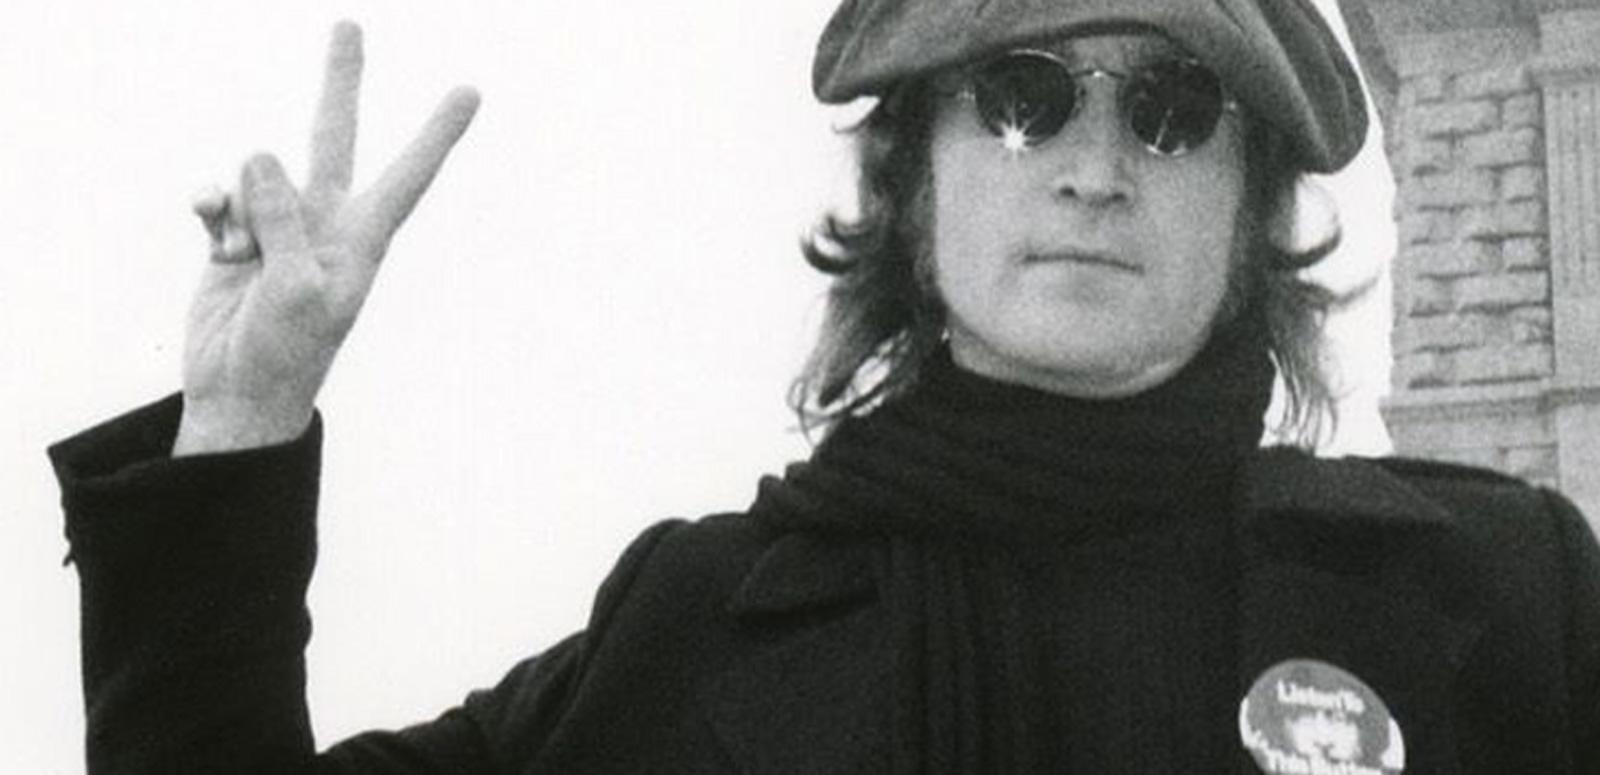 Head and shoulders shot of John Lennon pictured in New York, wearing sunglasses and a beret and making a peace sign with his fingers. C. 1973.